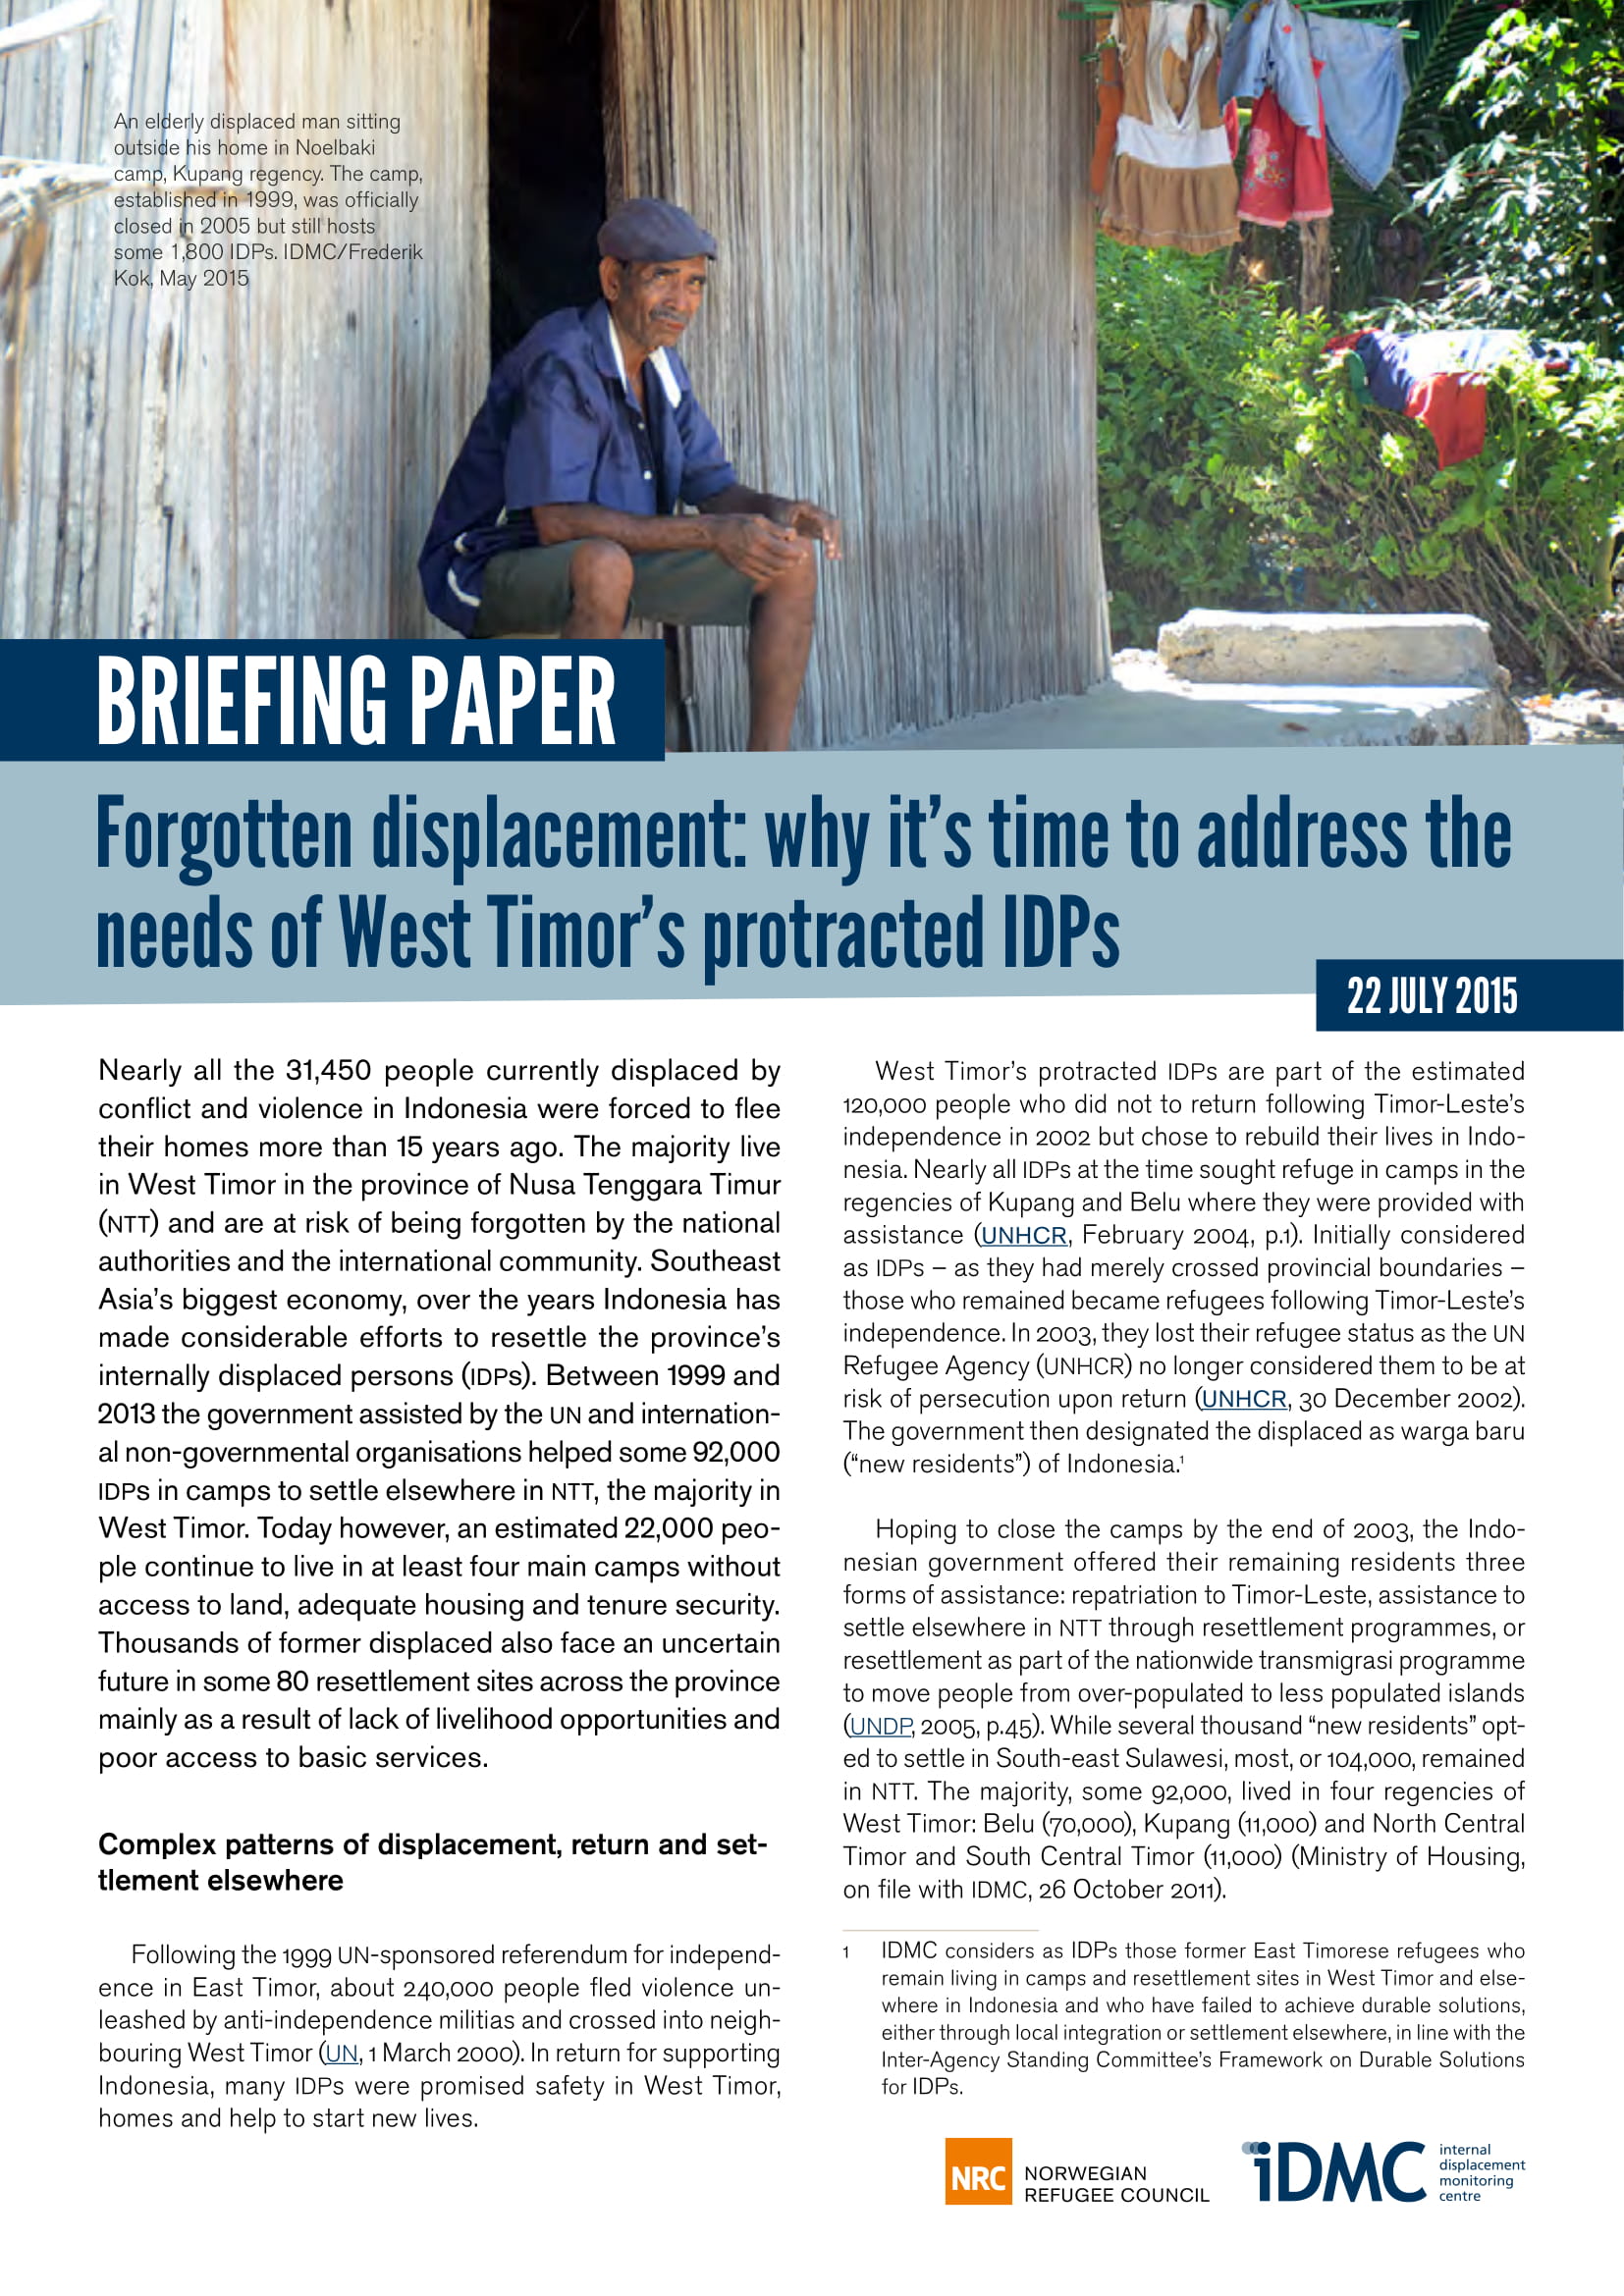 Forgotten displacement: why it’s time to address the needs of West Timor’s protracted IDPs